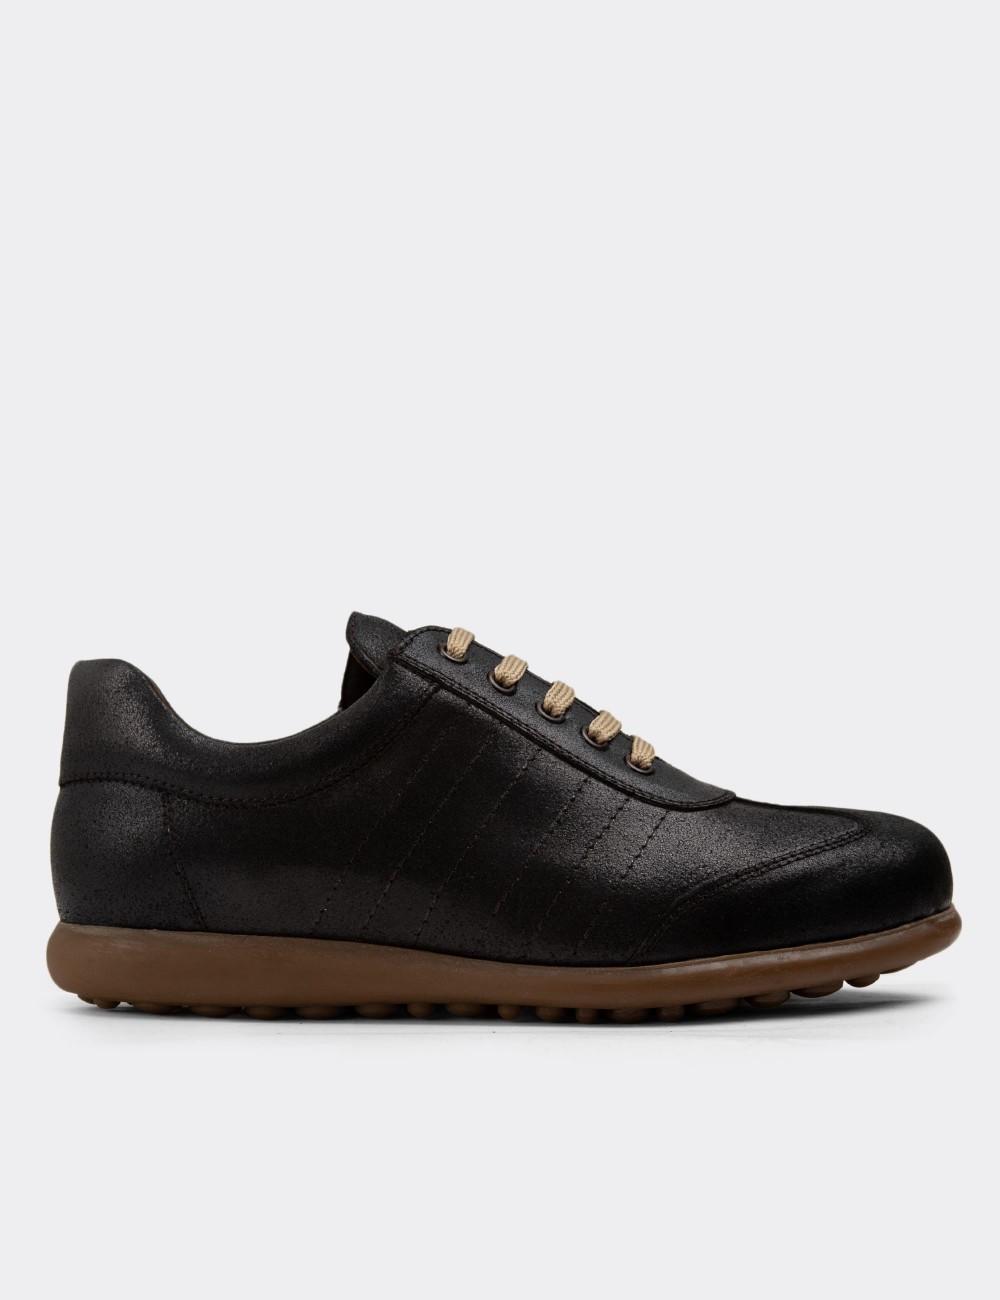 Brown Nubuck Calfskin Lace-up Shoes - 01826MKHVC15